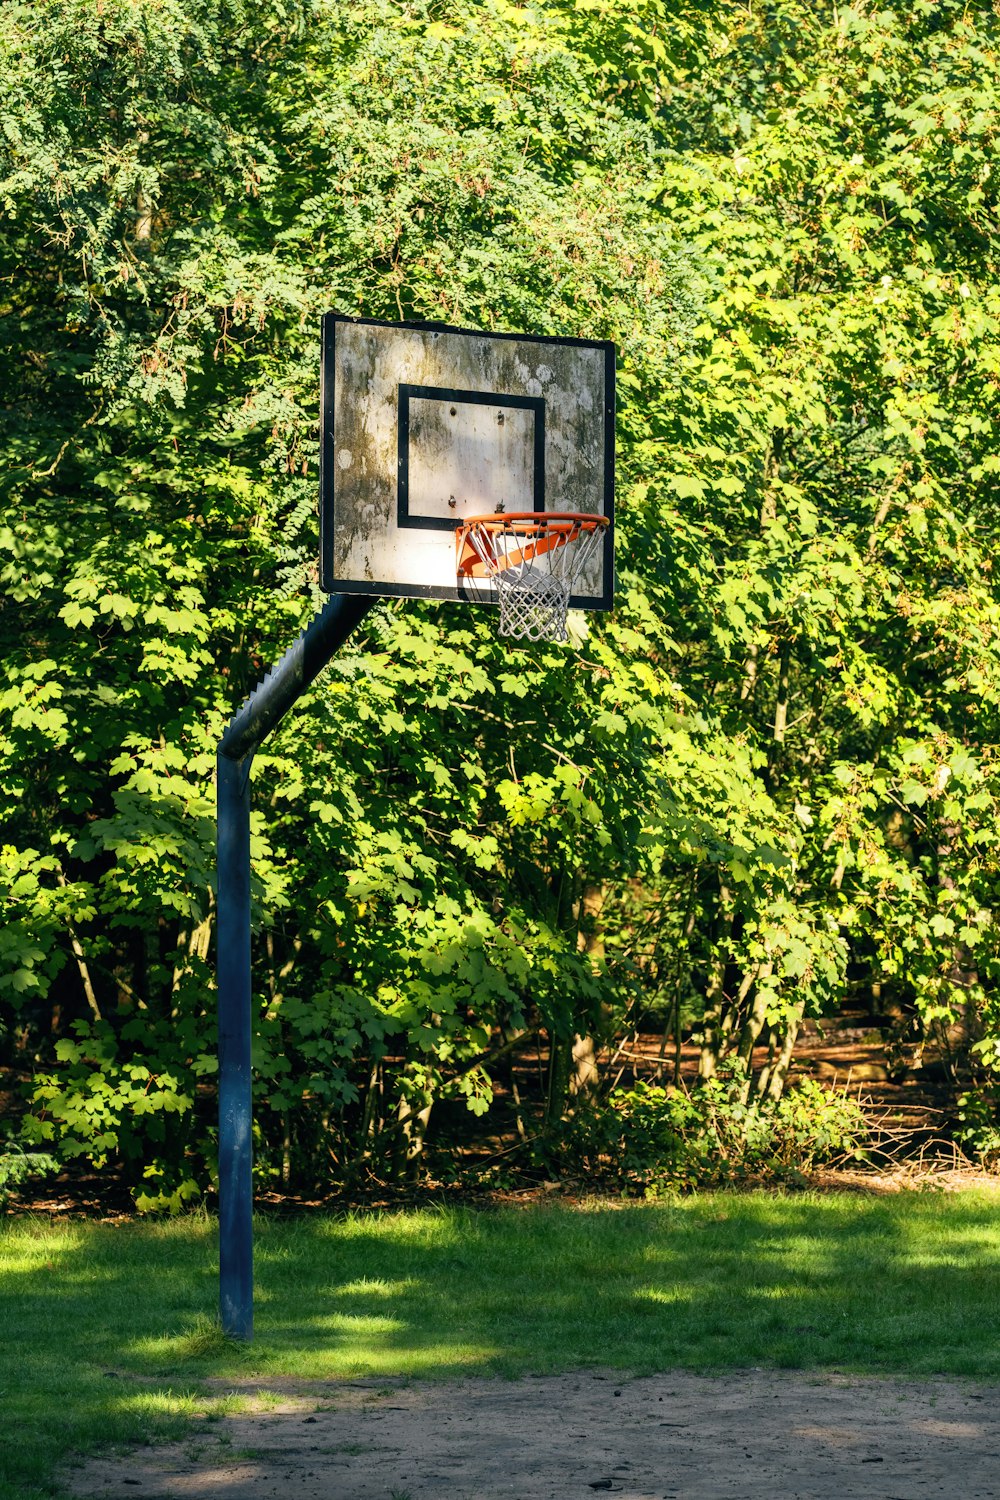 a basketball hoop in front of some trees